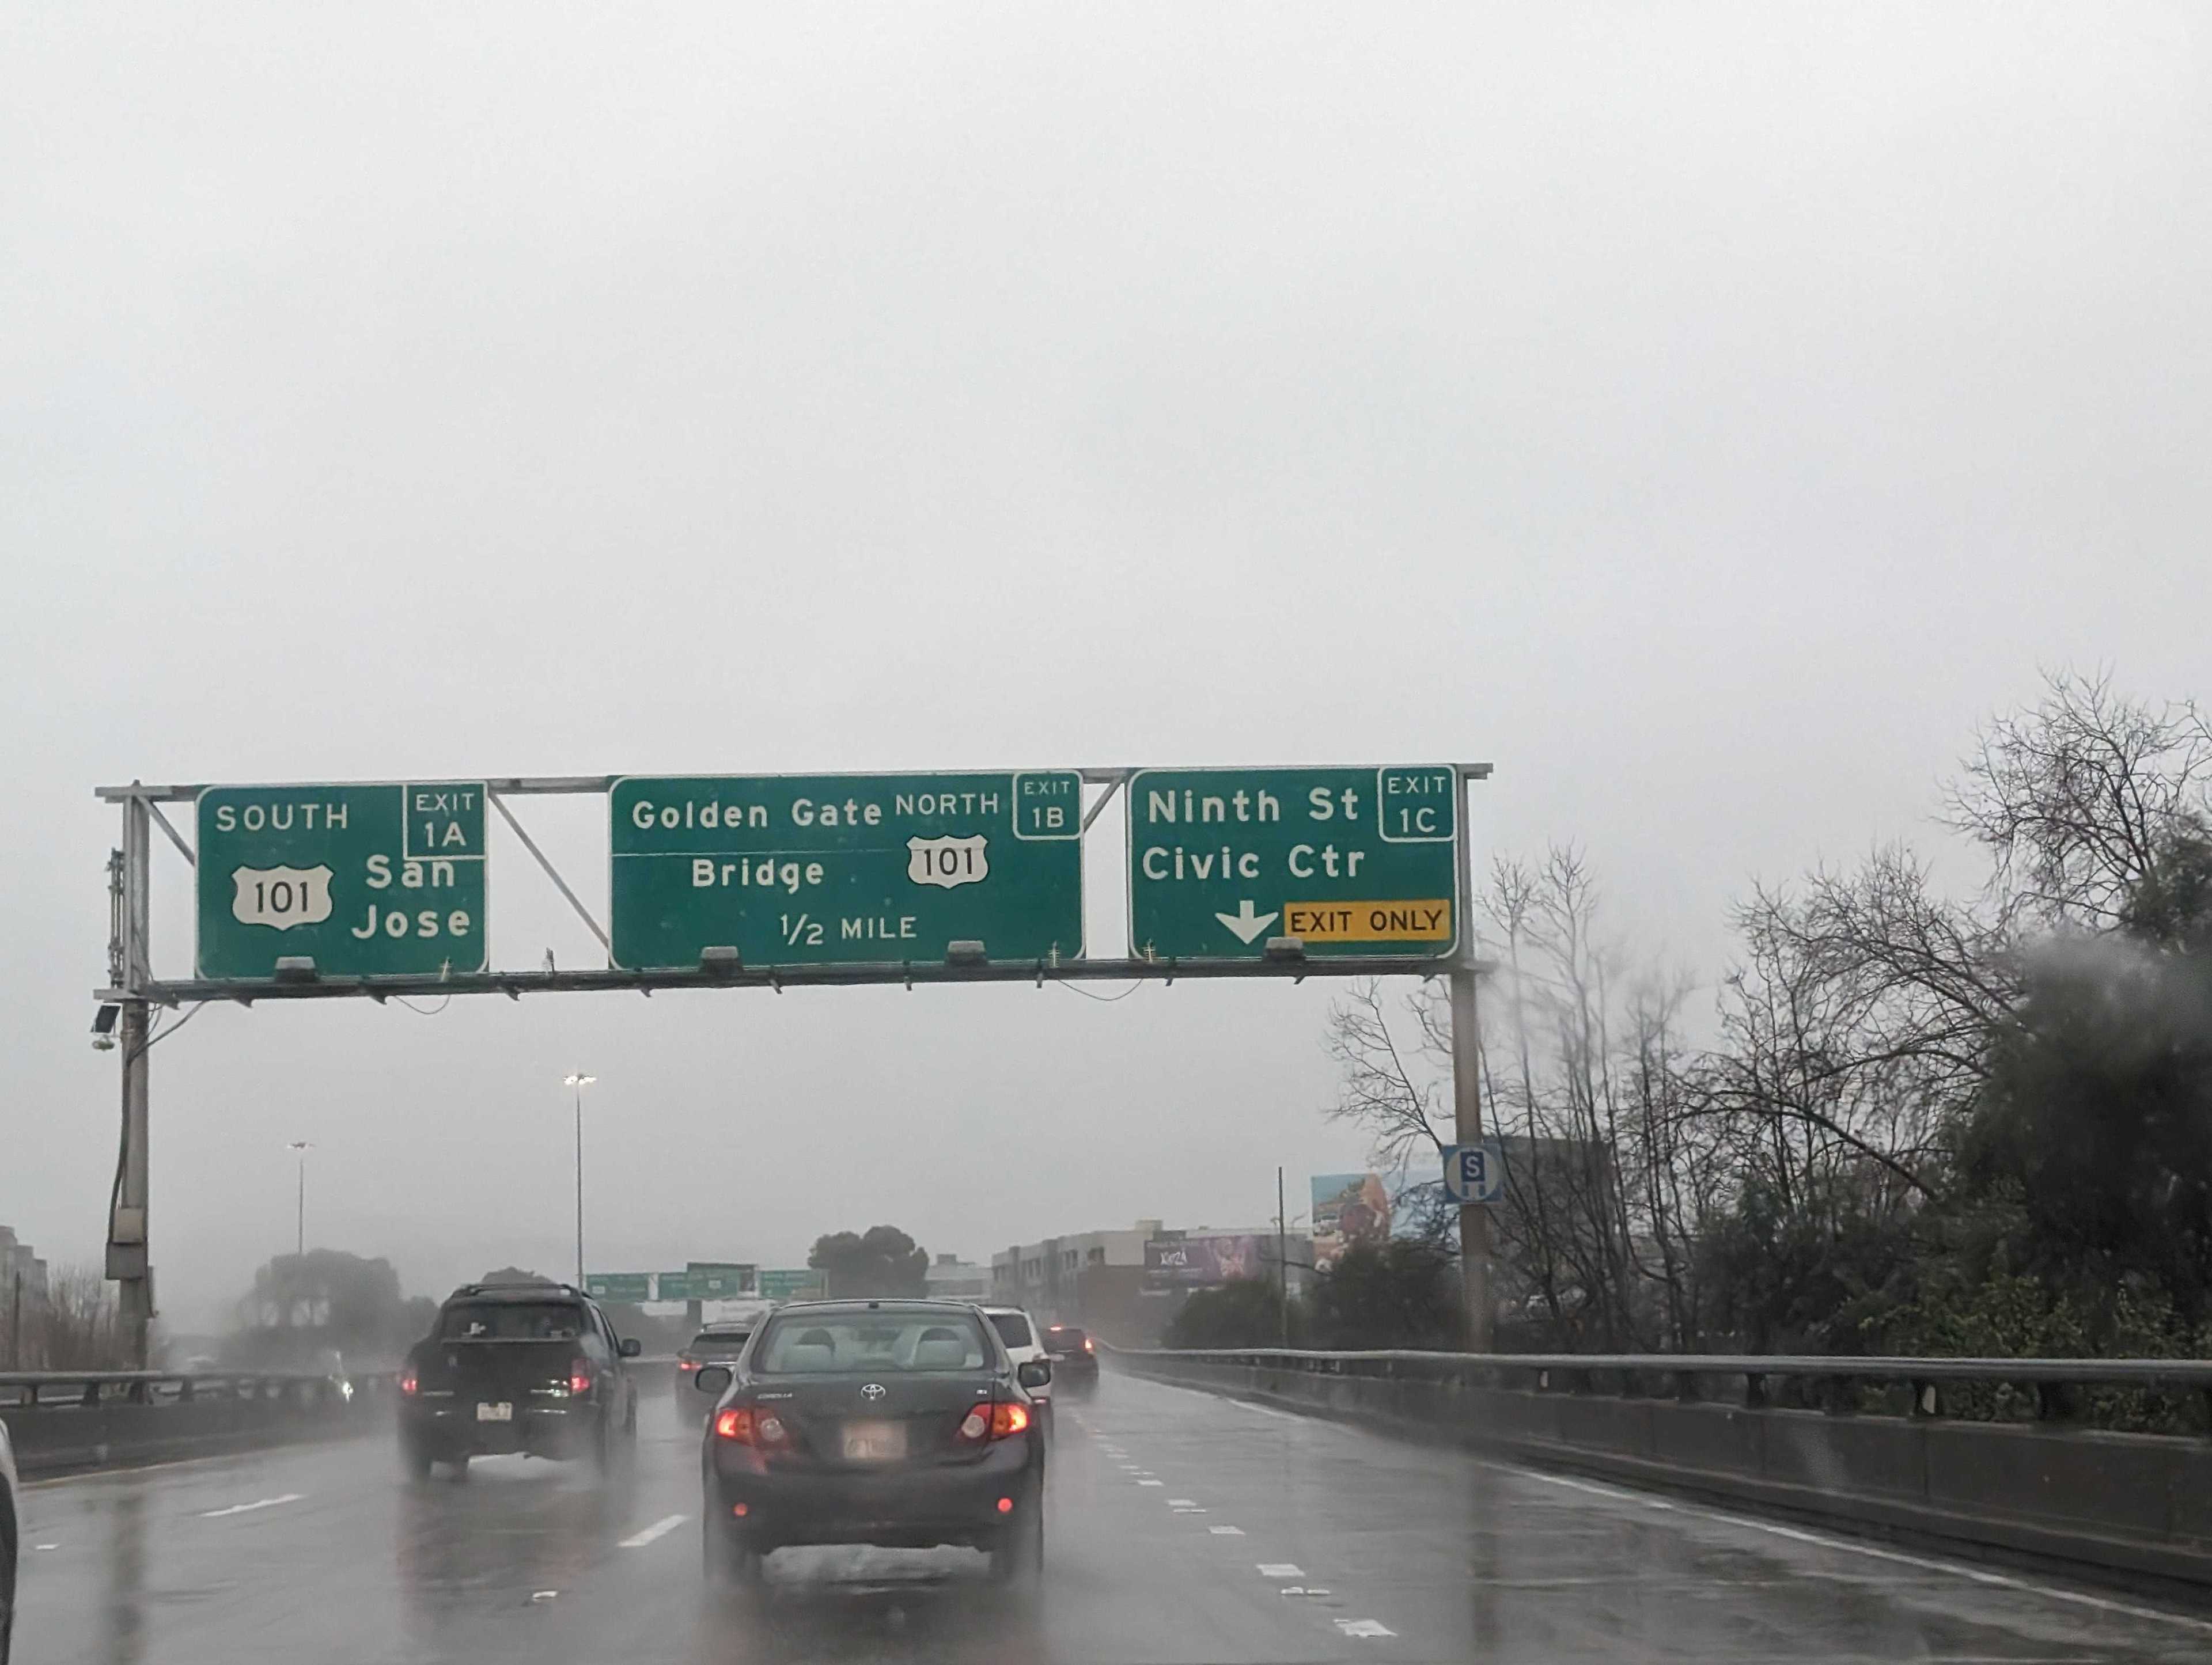 Cars and trucks ride along a rain-soaked highway under road signs.